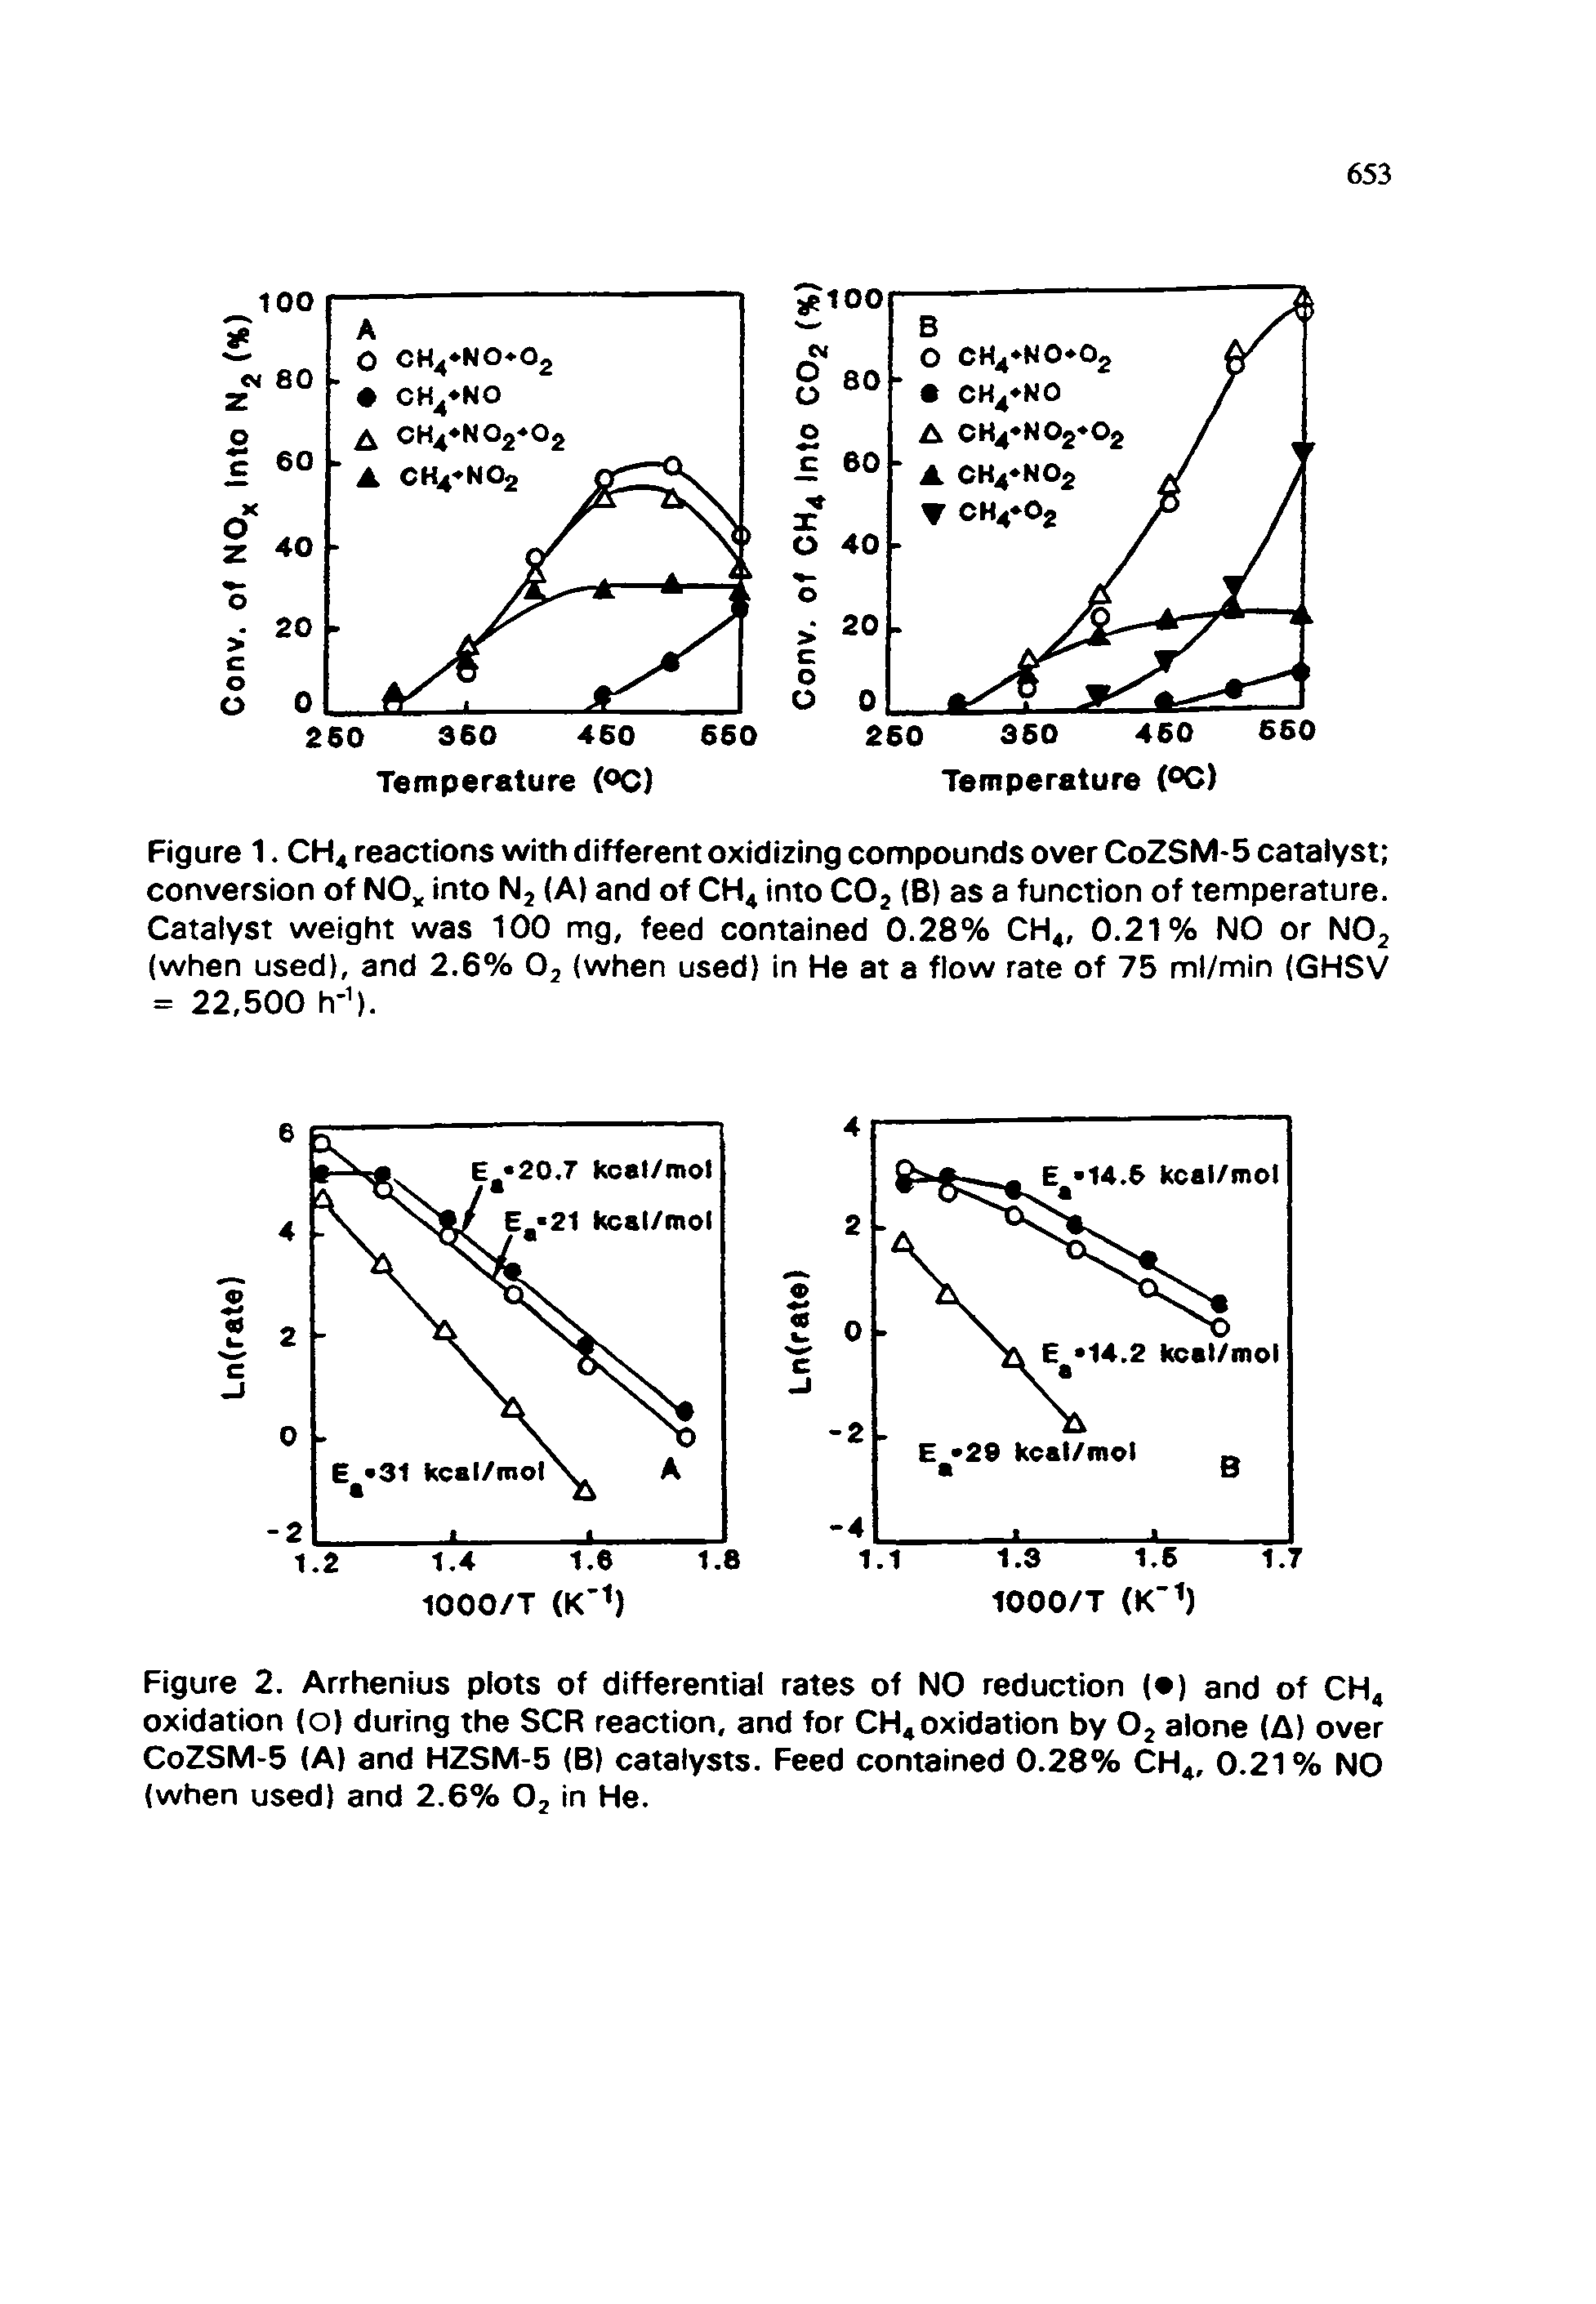 Figure 1. CH reactions with different oxidizing compounds over CoZSM-5 catalyst conversion of NO into (A) and of CH into COj (B) as a function of temperature. Catalyst weight was 100 mg, feed contained 0.28% CH4, 0.21% NO or NOj (when used), and 2.6% Oj (when used) in He at a flow rate of 75 ml/min (GHSV = 22,500 h- ).